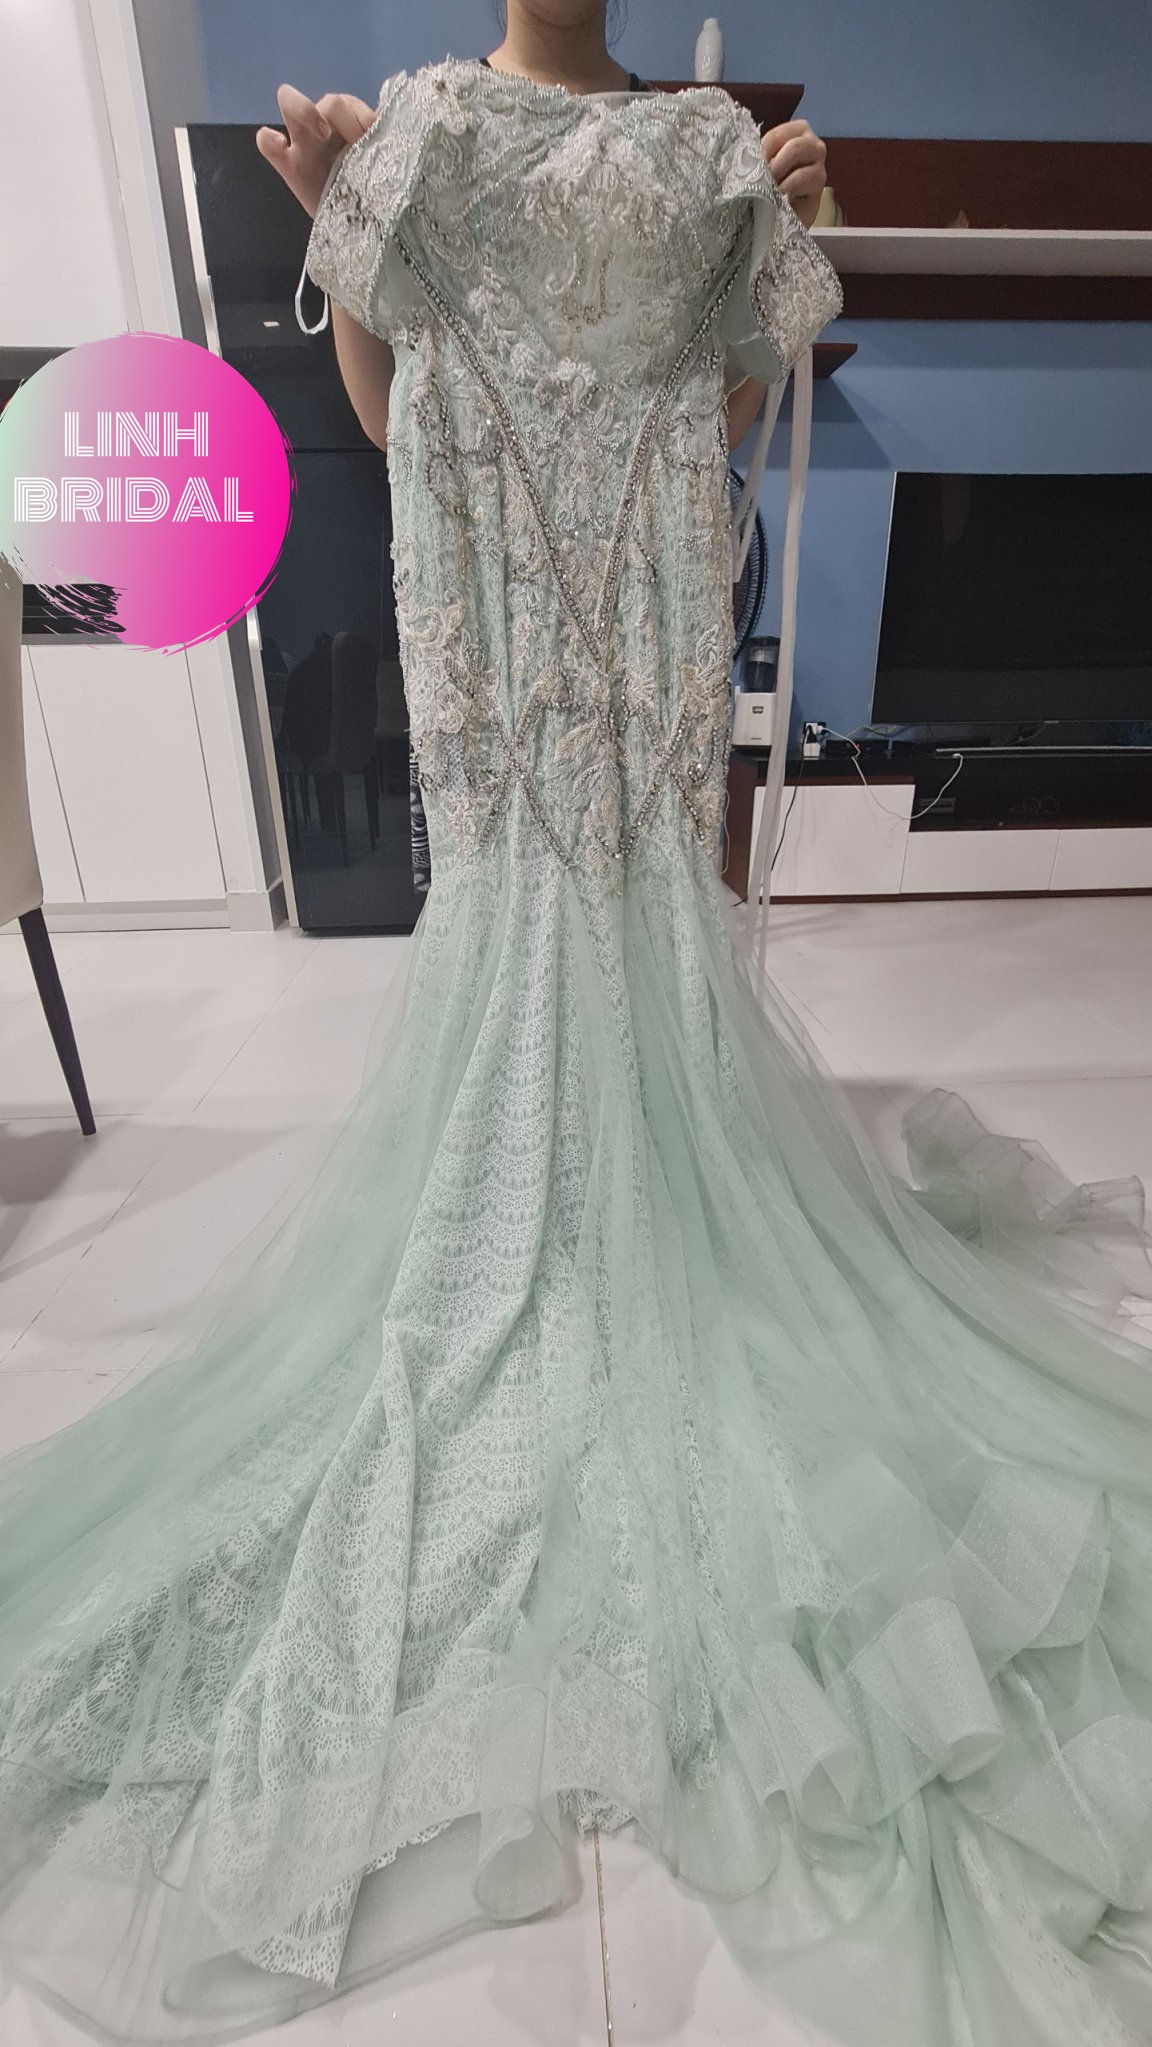 Various Styles Pastel Mint Green Floral Lace Ball Gown -  Israel